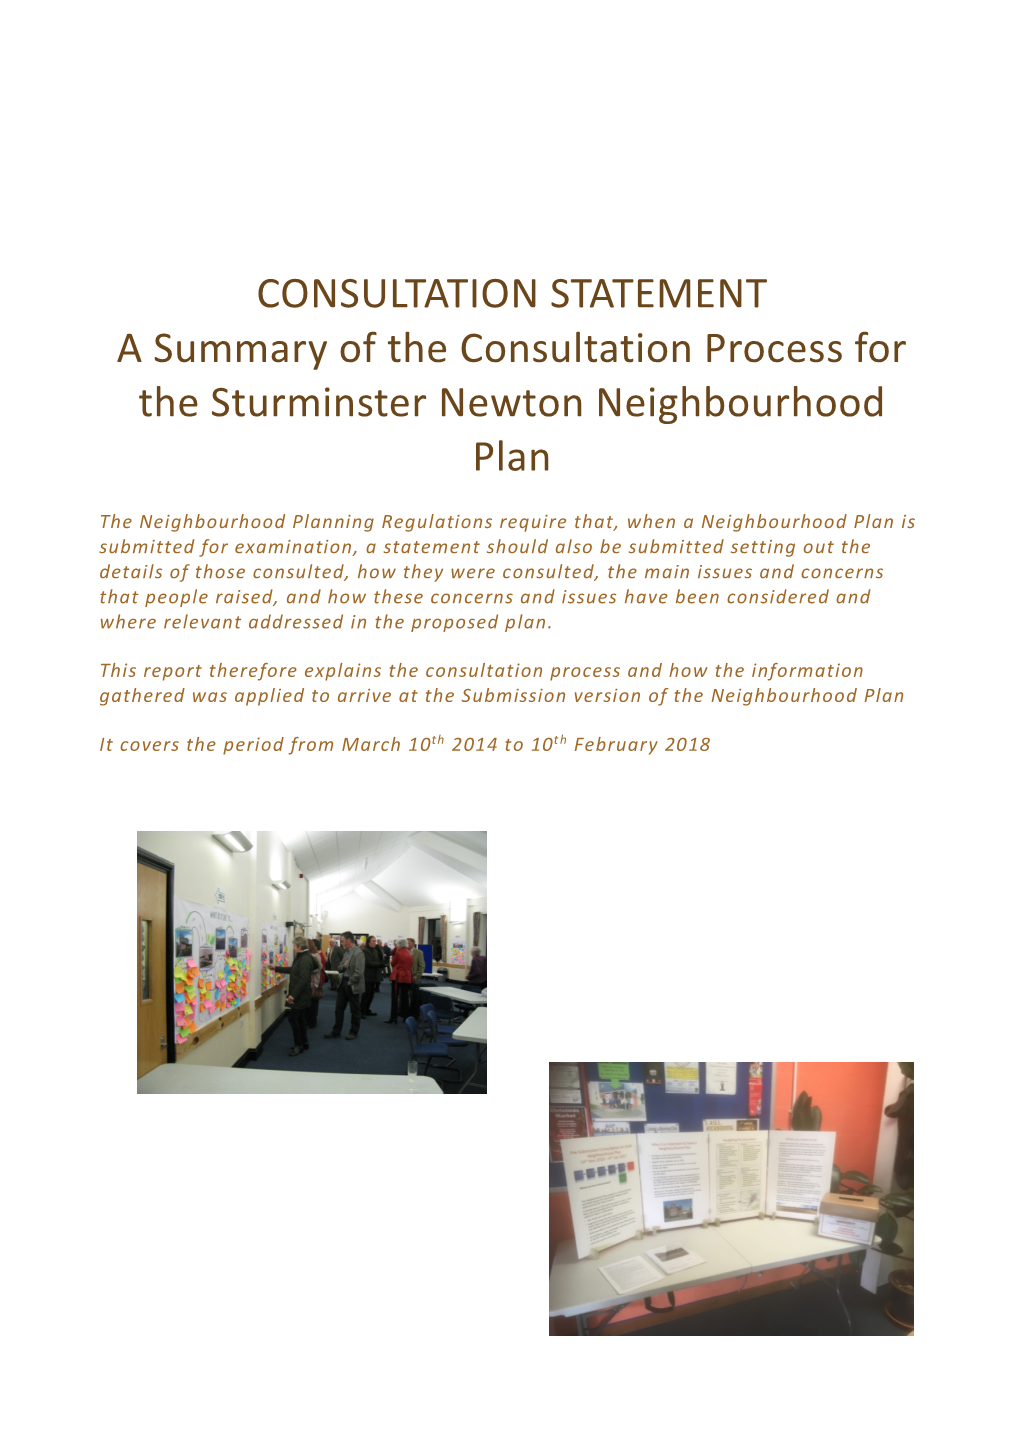 CONSULTATION STATEMENT a Summary of the Consultation Process for the Sturminster Newton Neighbourhood Plan